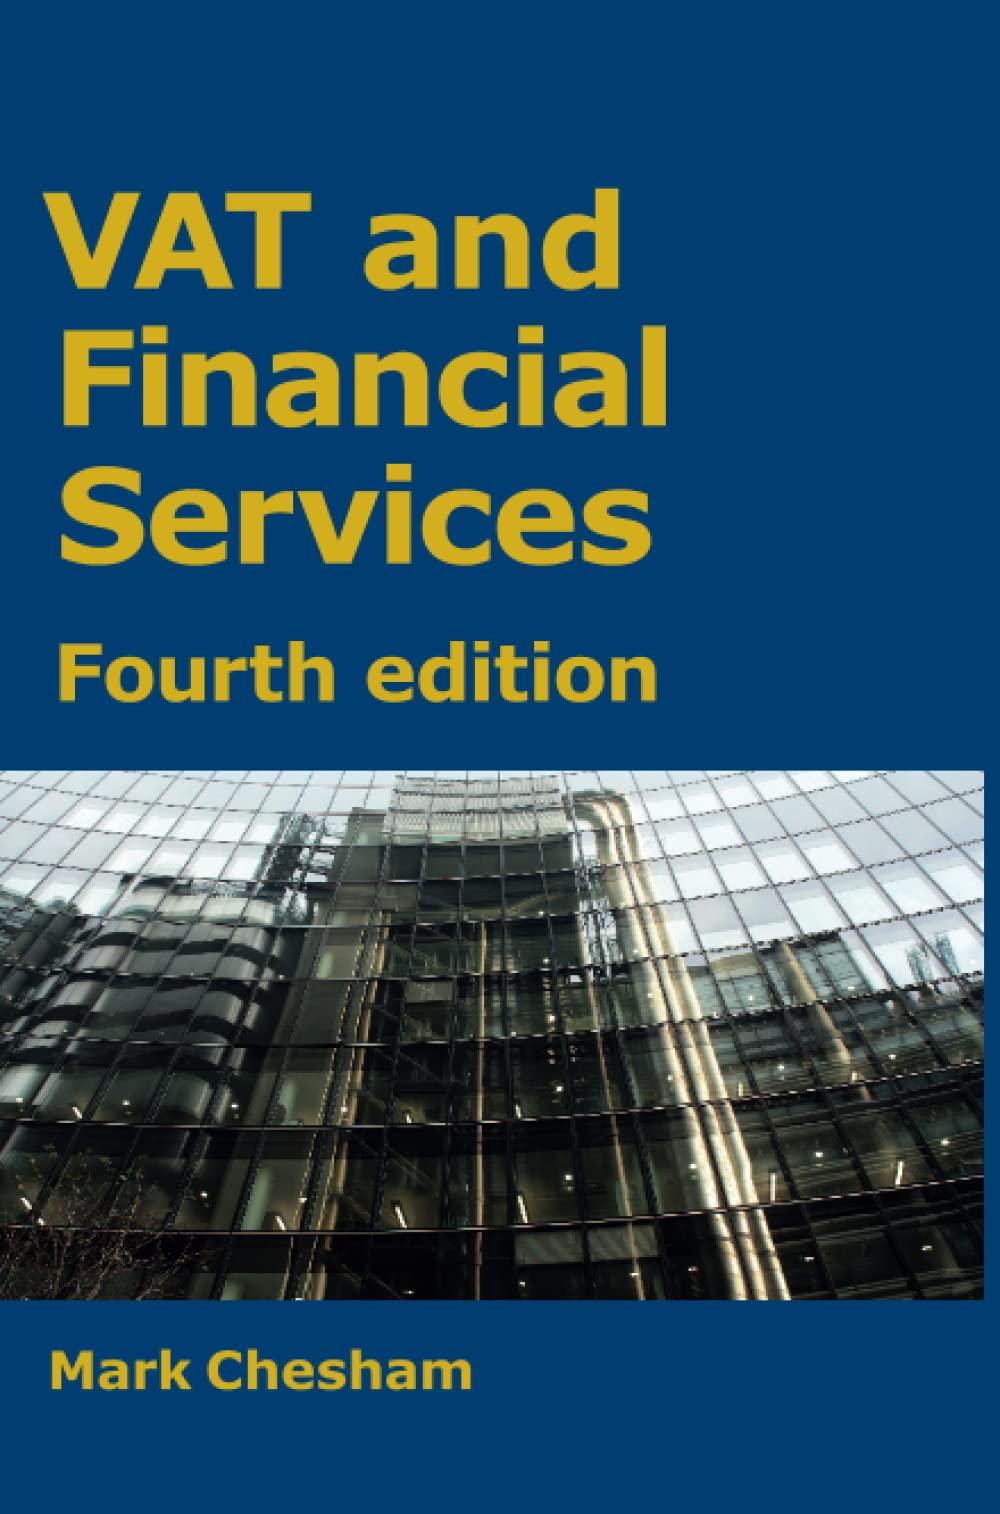 vat and financial services 4th edition mark chesham 1913507270, 978-1913507275